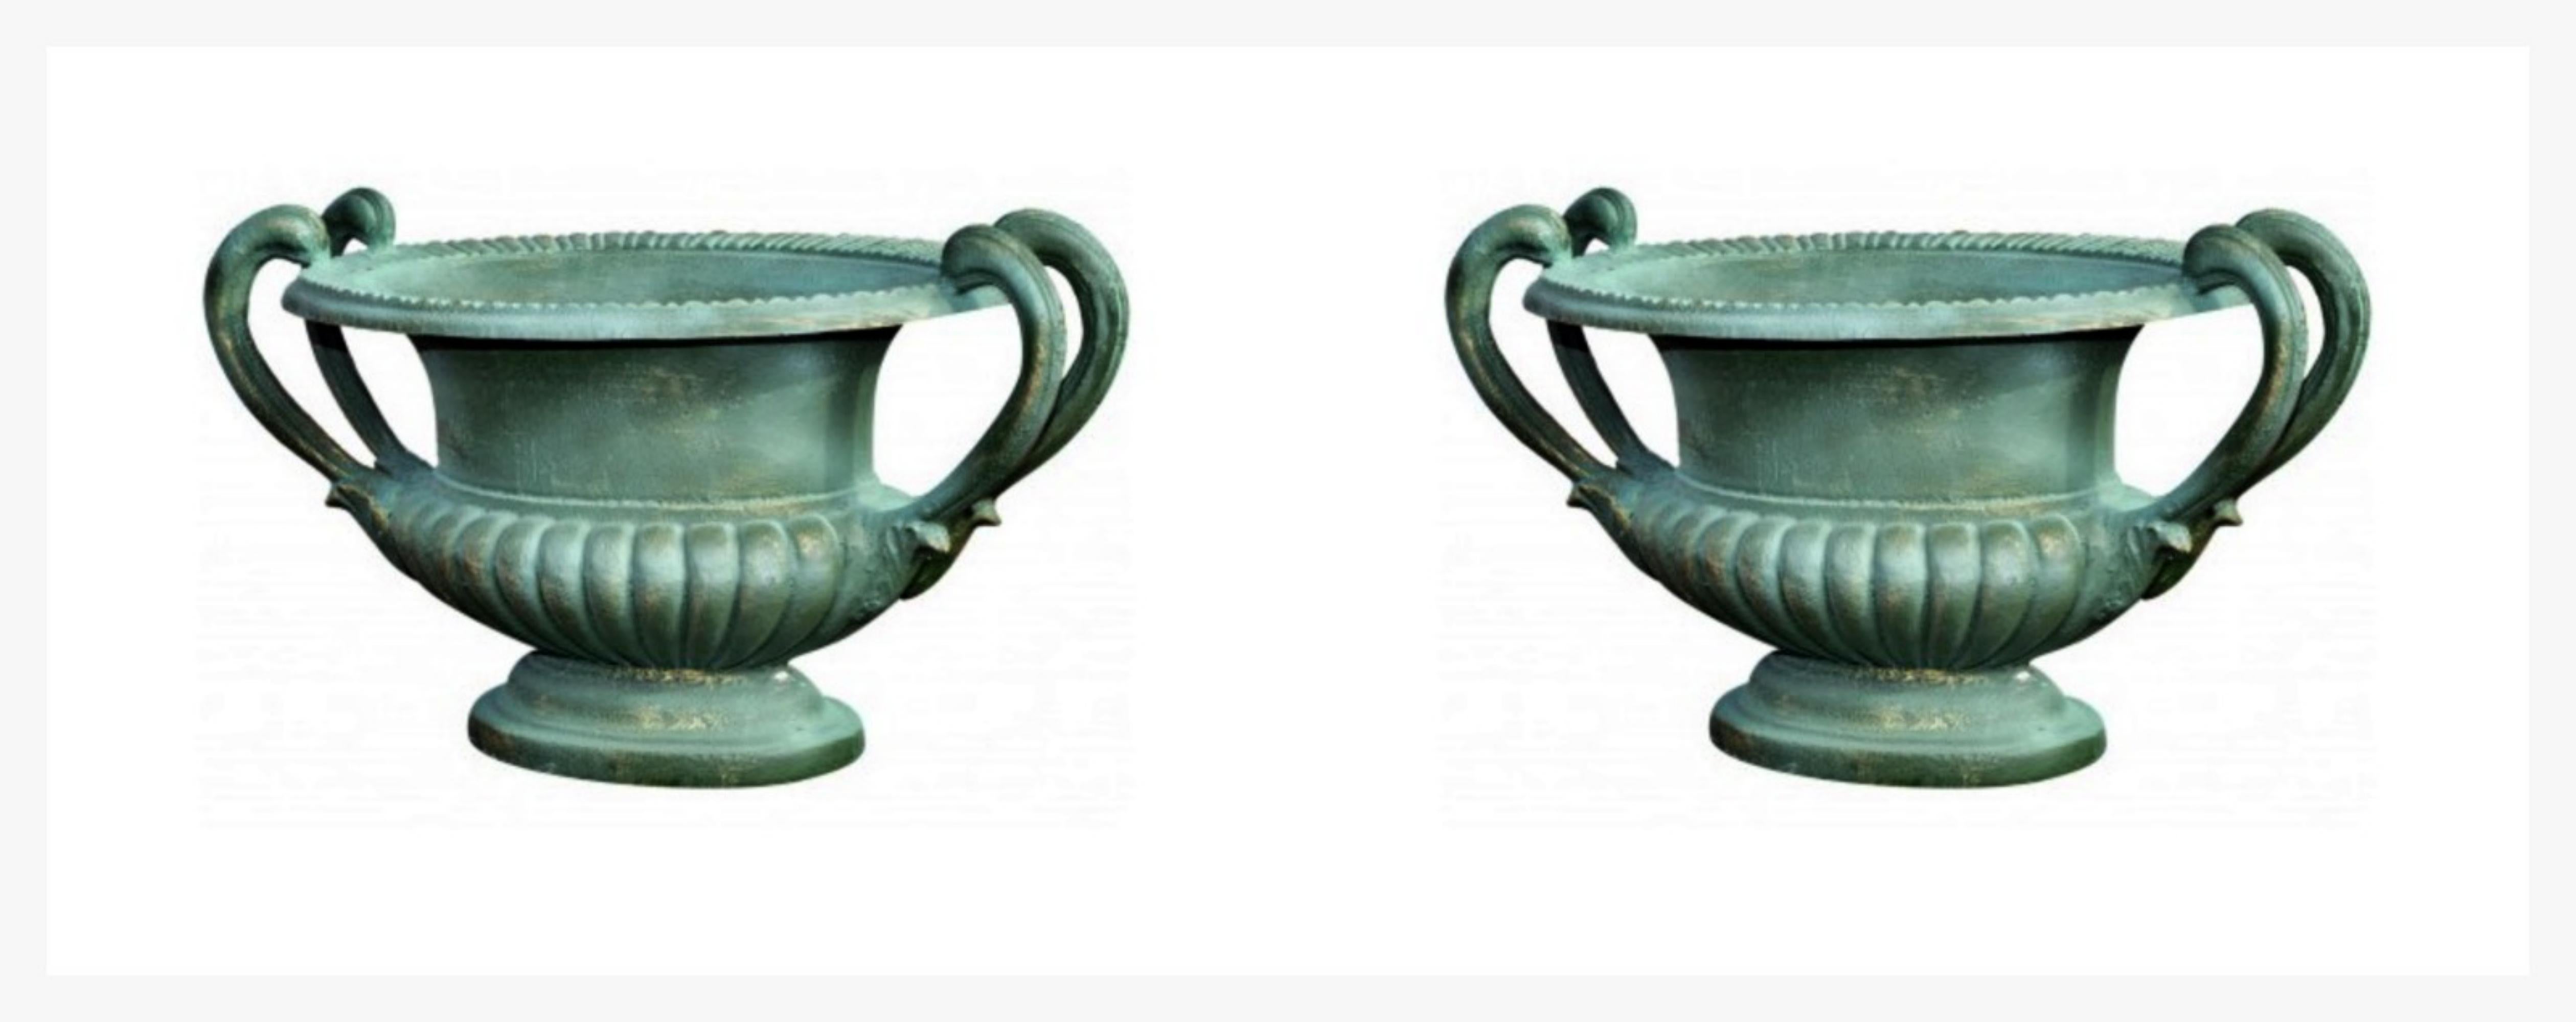 PAIR OF MEDICI - TUSCANY POT WITH HANDLES, early 20th century.

Measures: HEIGHT 45cm
LENGTH 78cms
DEPTH 50cm
WEIGHT 20Kg
MATERIALCast-iron
NOTE 01 Oval base 36 X 24

Good condition.